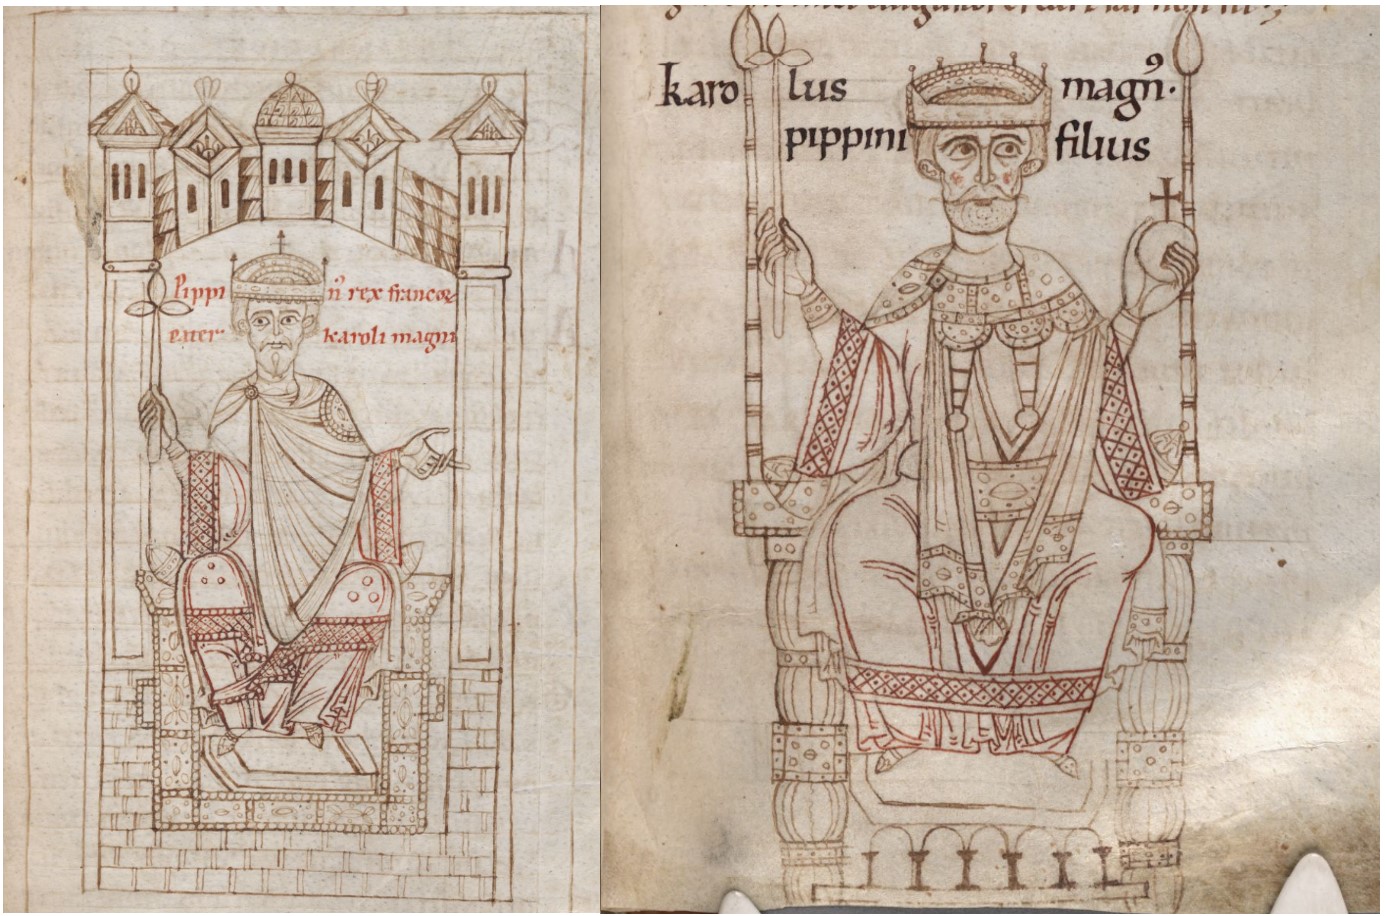 Portrait of the enthroned Pepin the Short and of his son, Charlemagne